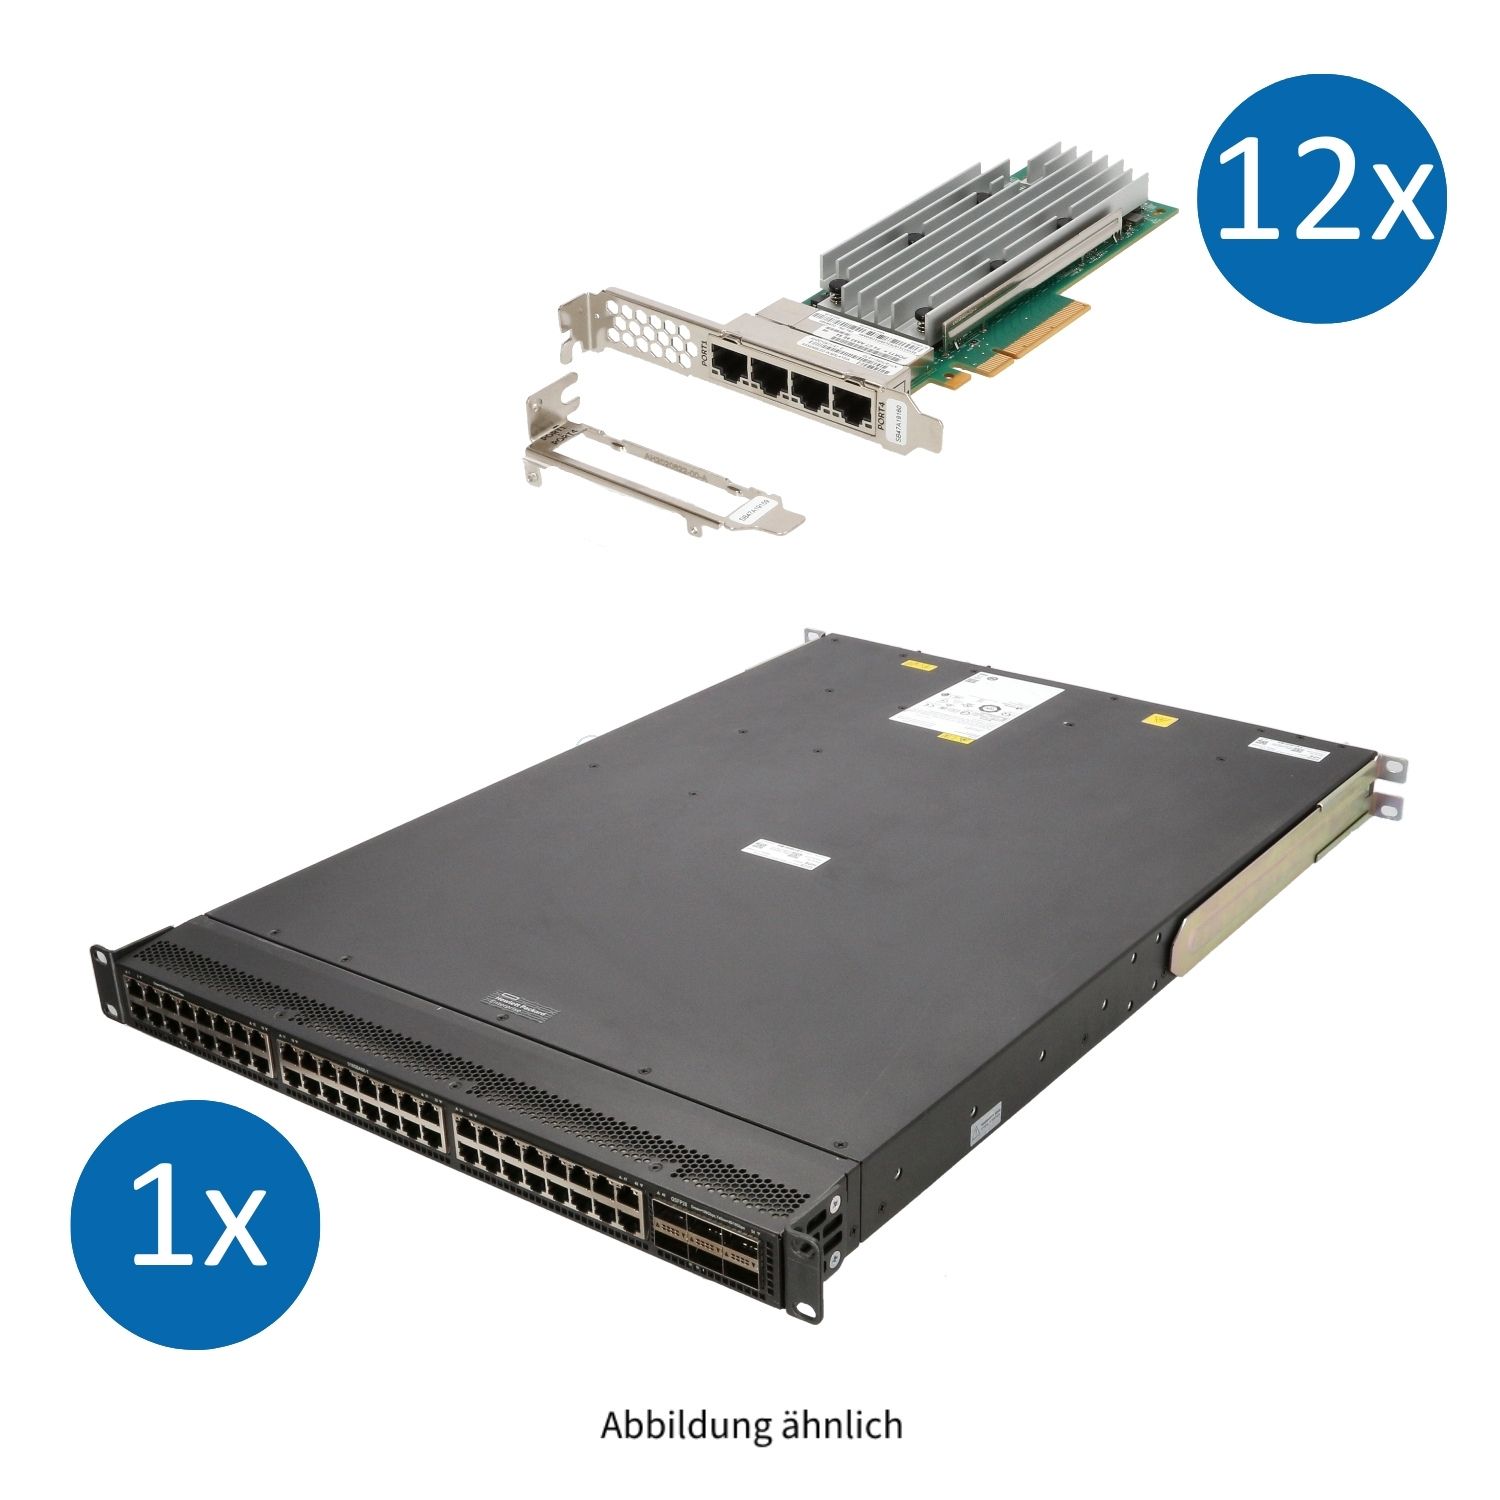 Starterset "XXL" HPE FlexFabric 5940 48x 10GBase-T 6x QSFP28 Front to Back Managed Switch 2x PSU und 12x QLogic QL41134 4x 10GBase-T PCIe Server Ethernet Adapter